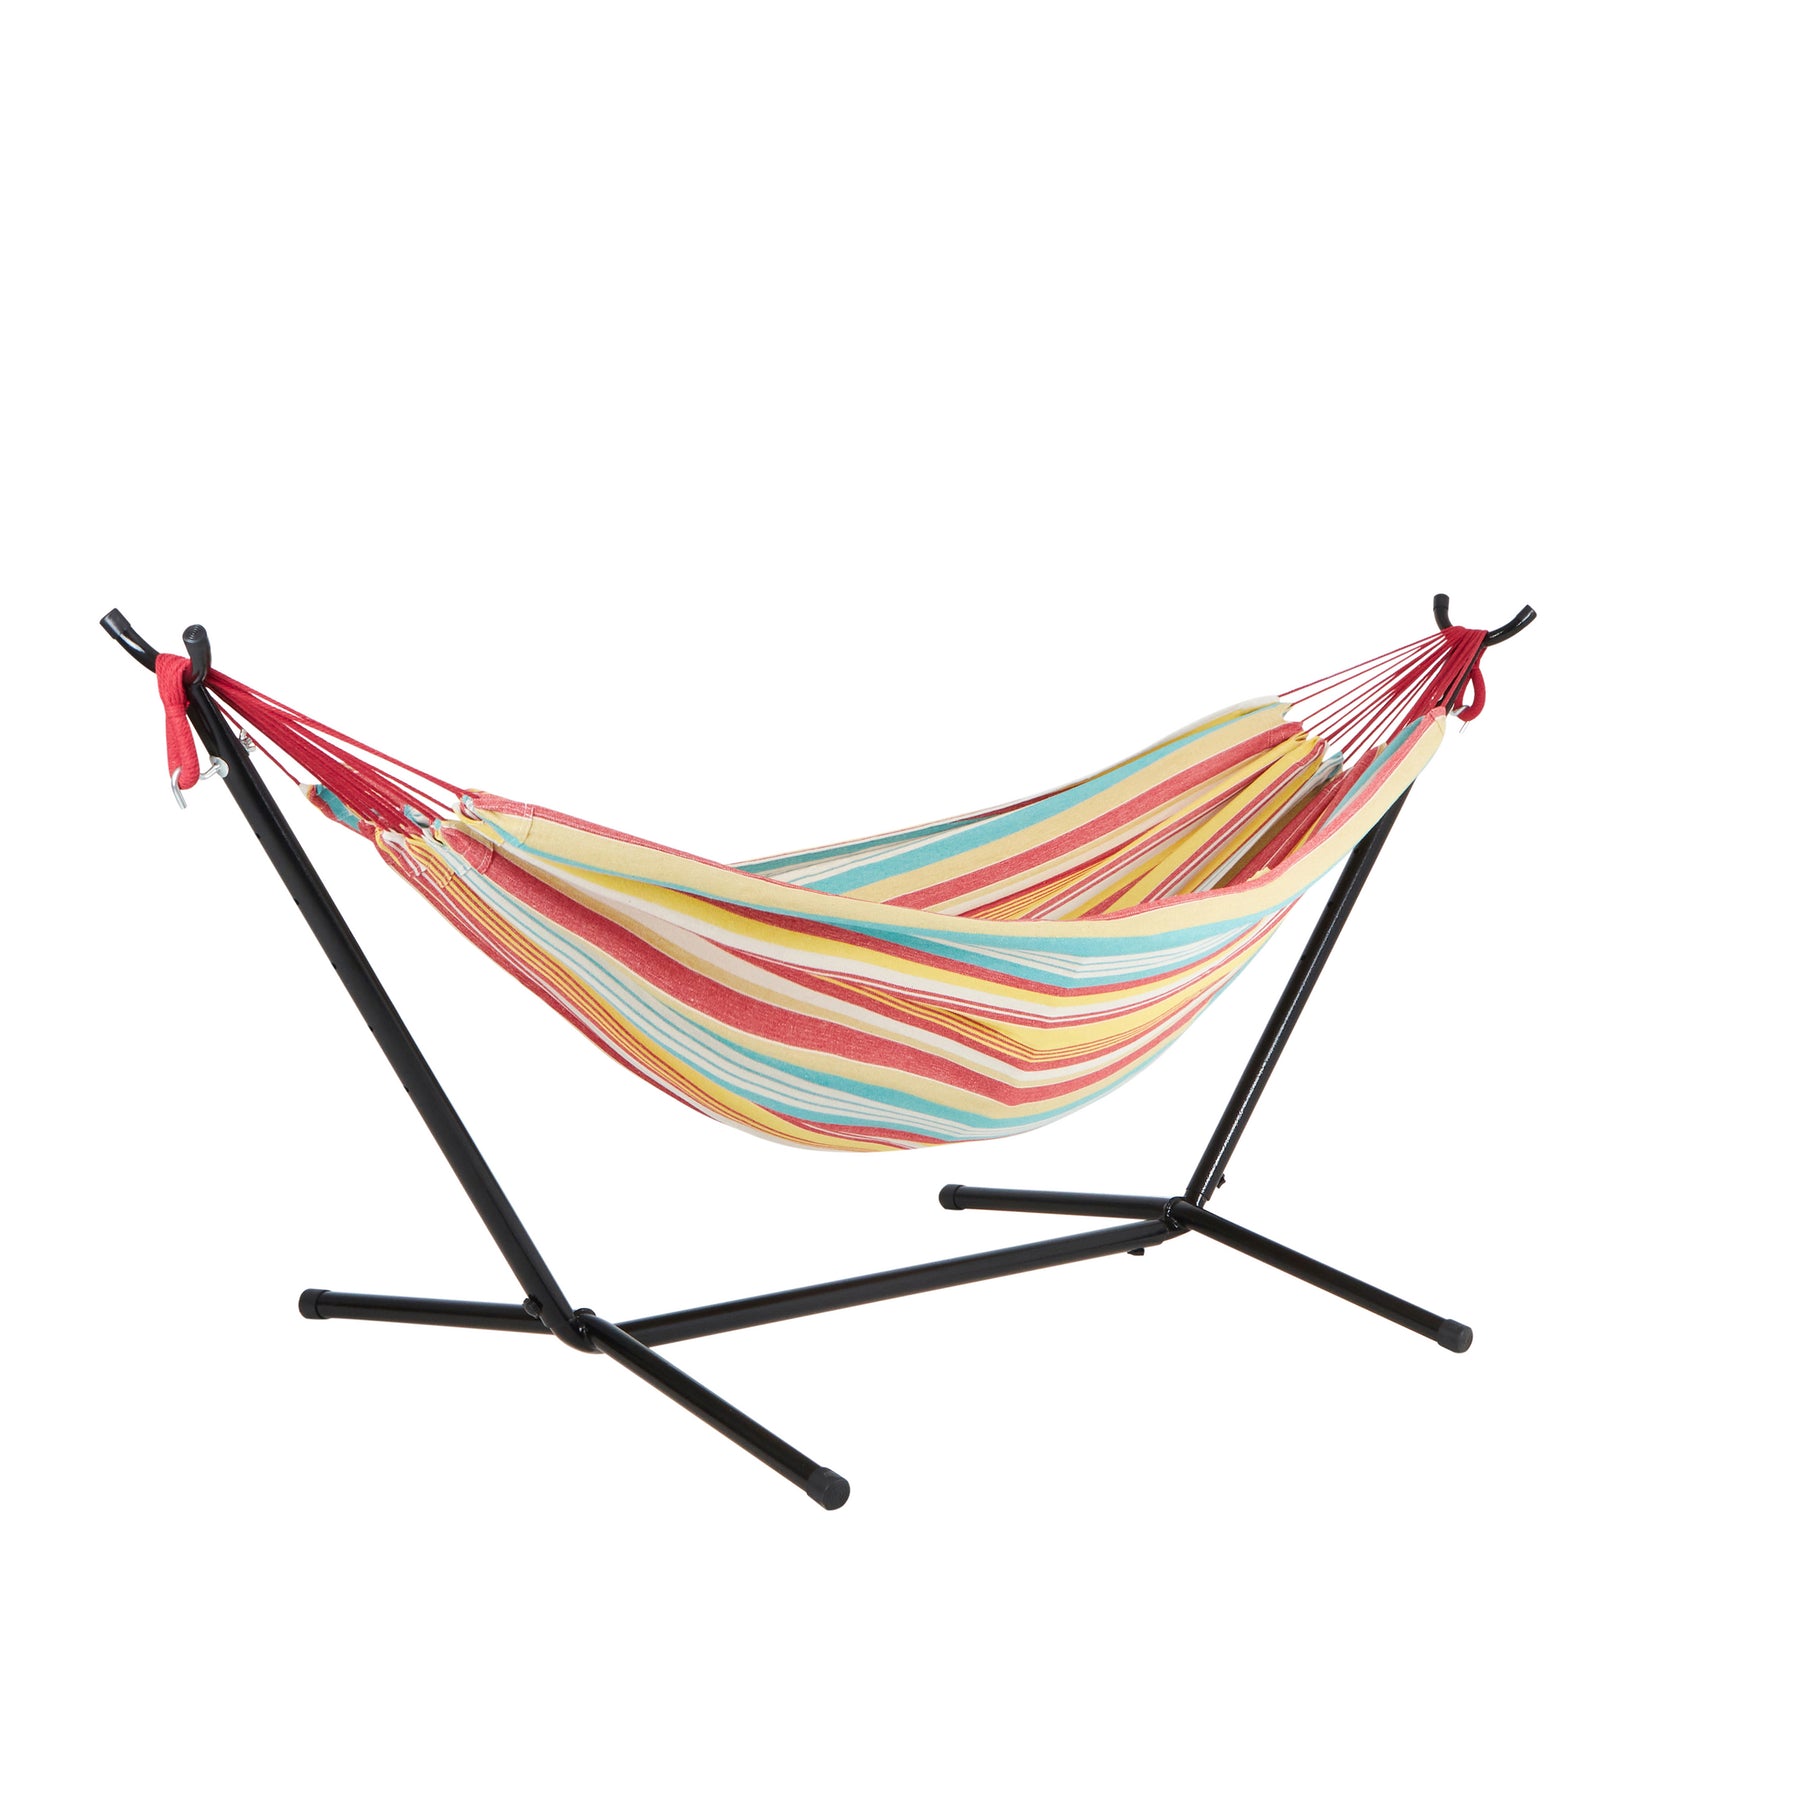 Bliss Hammocks 60-inch Wide Hammock & Built-in Stand in the Watermelon Stripe variation, which are stripes of red, yellow, white, and blue.